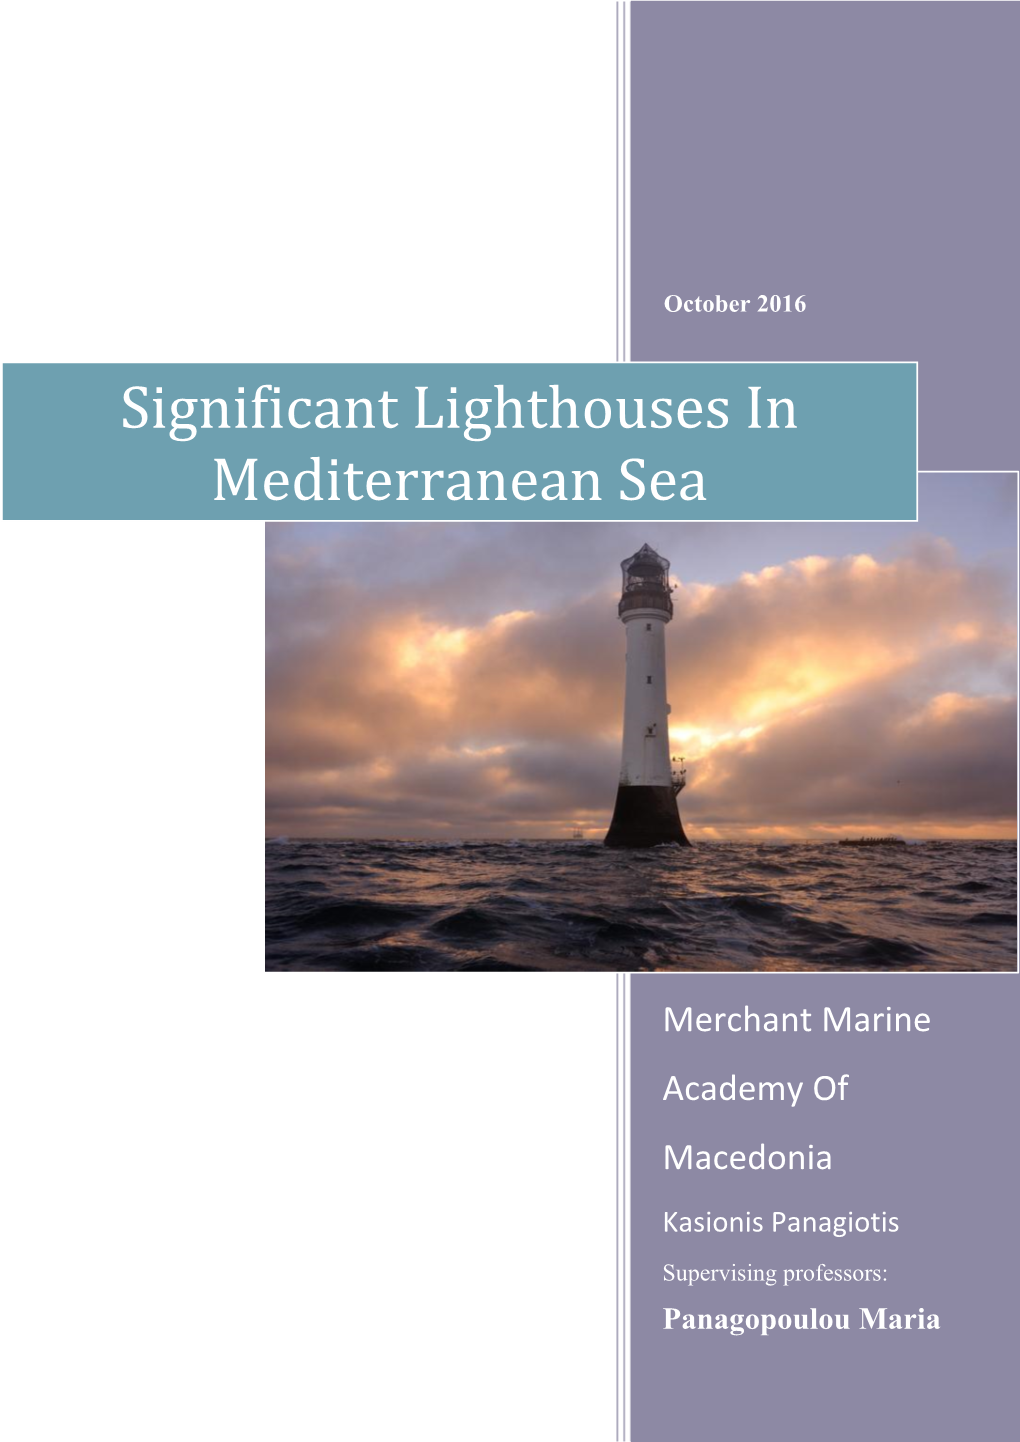 Significant Lighthouses in Mediterranean Sea